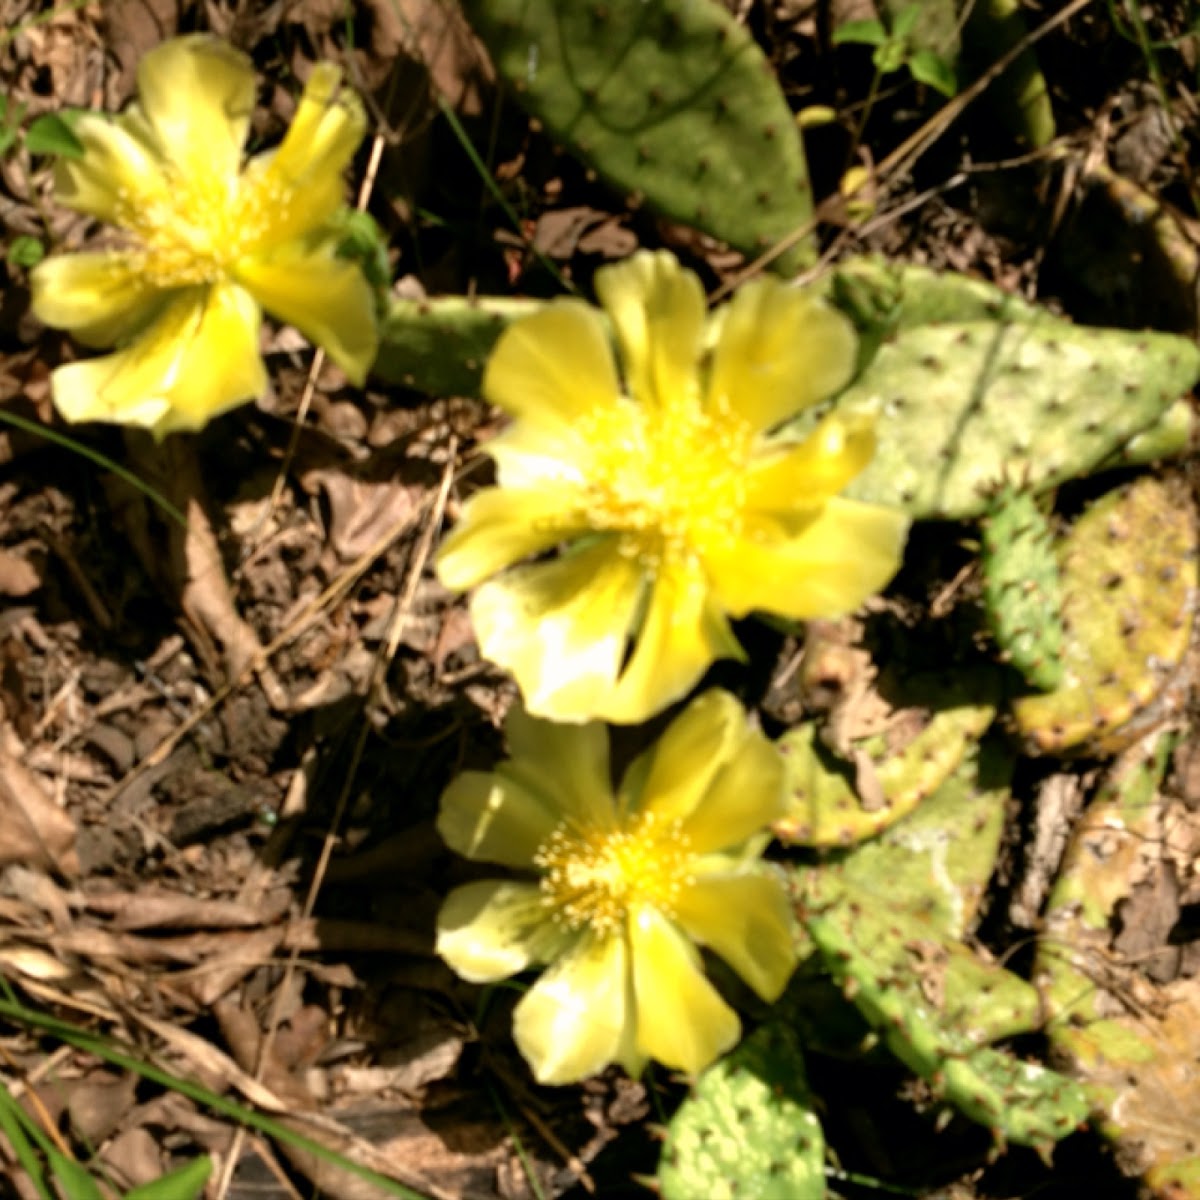 Prickly pear blooming?